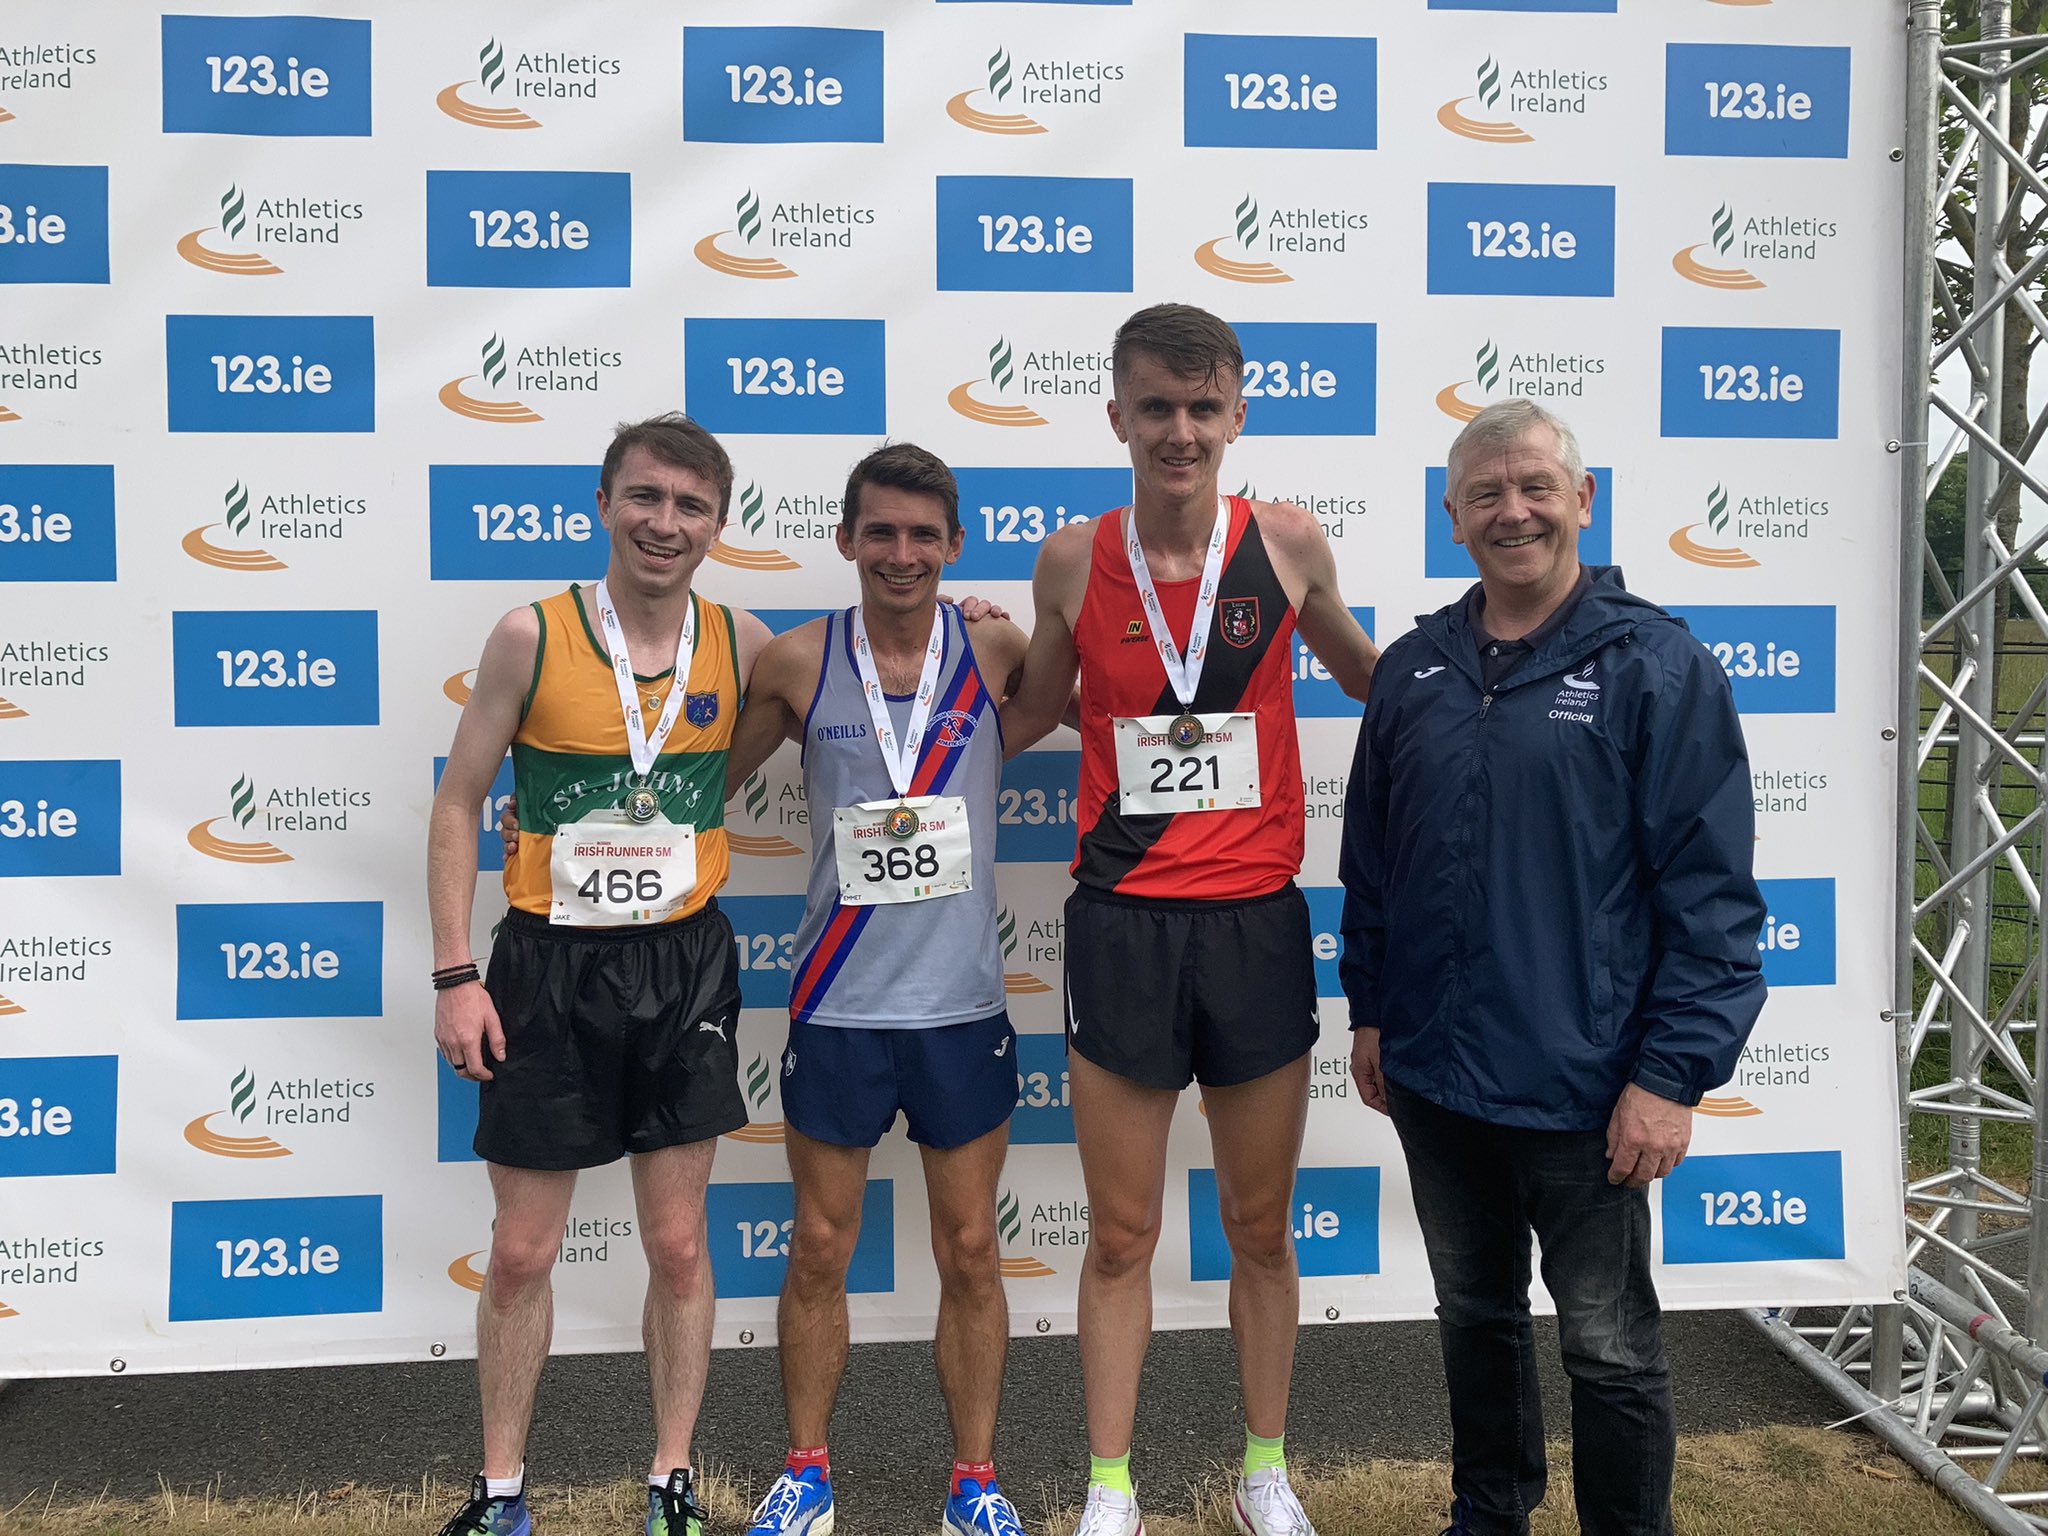 JENNINGS AND RYAN ON THE DOUBLE FOR DSD AT NATIONAL 5 MILE